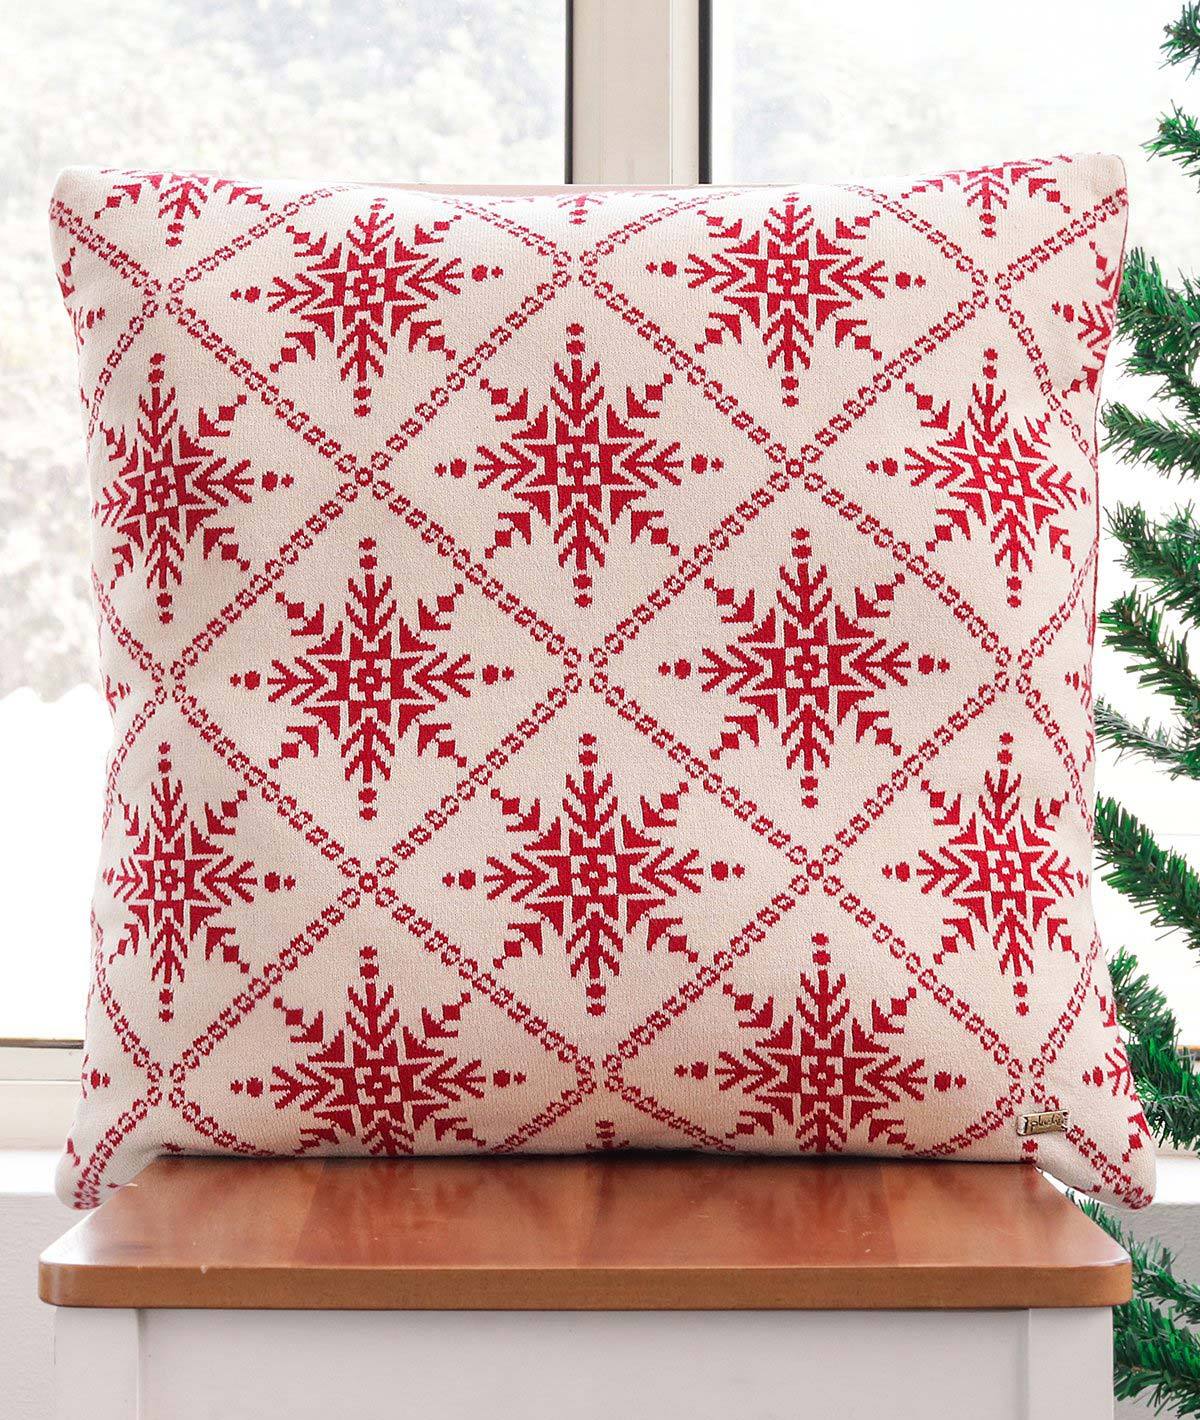 Red Star Cotton Knitted Decorative Natural & Red Color 20 x 20 Inches Cushion Cover